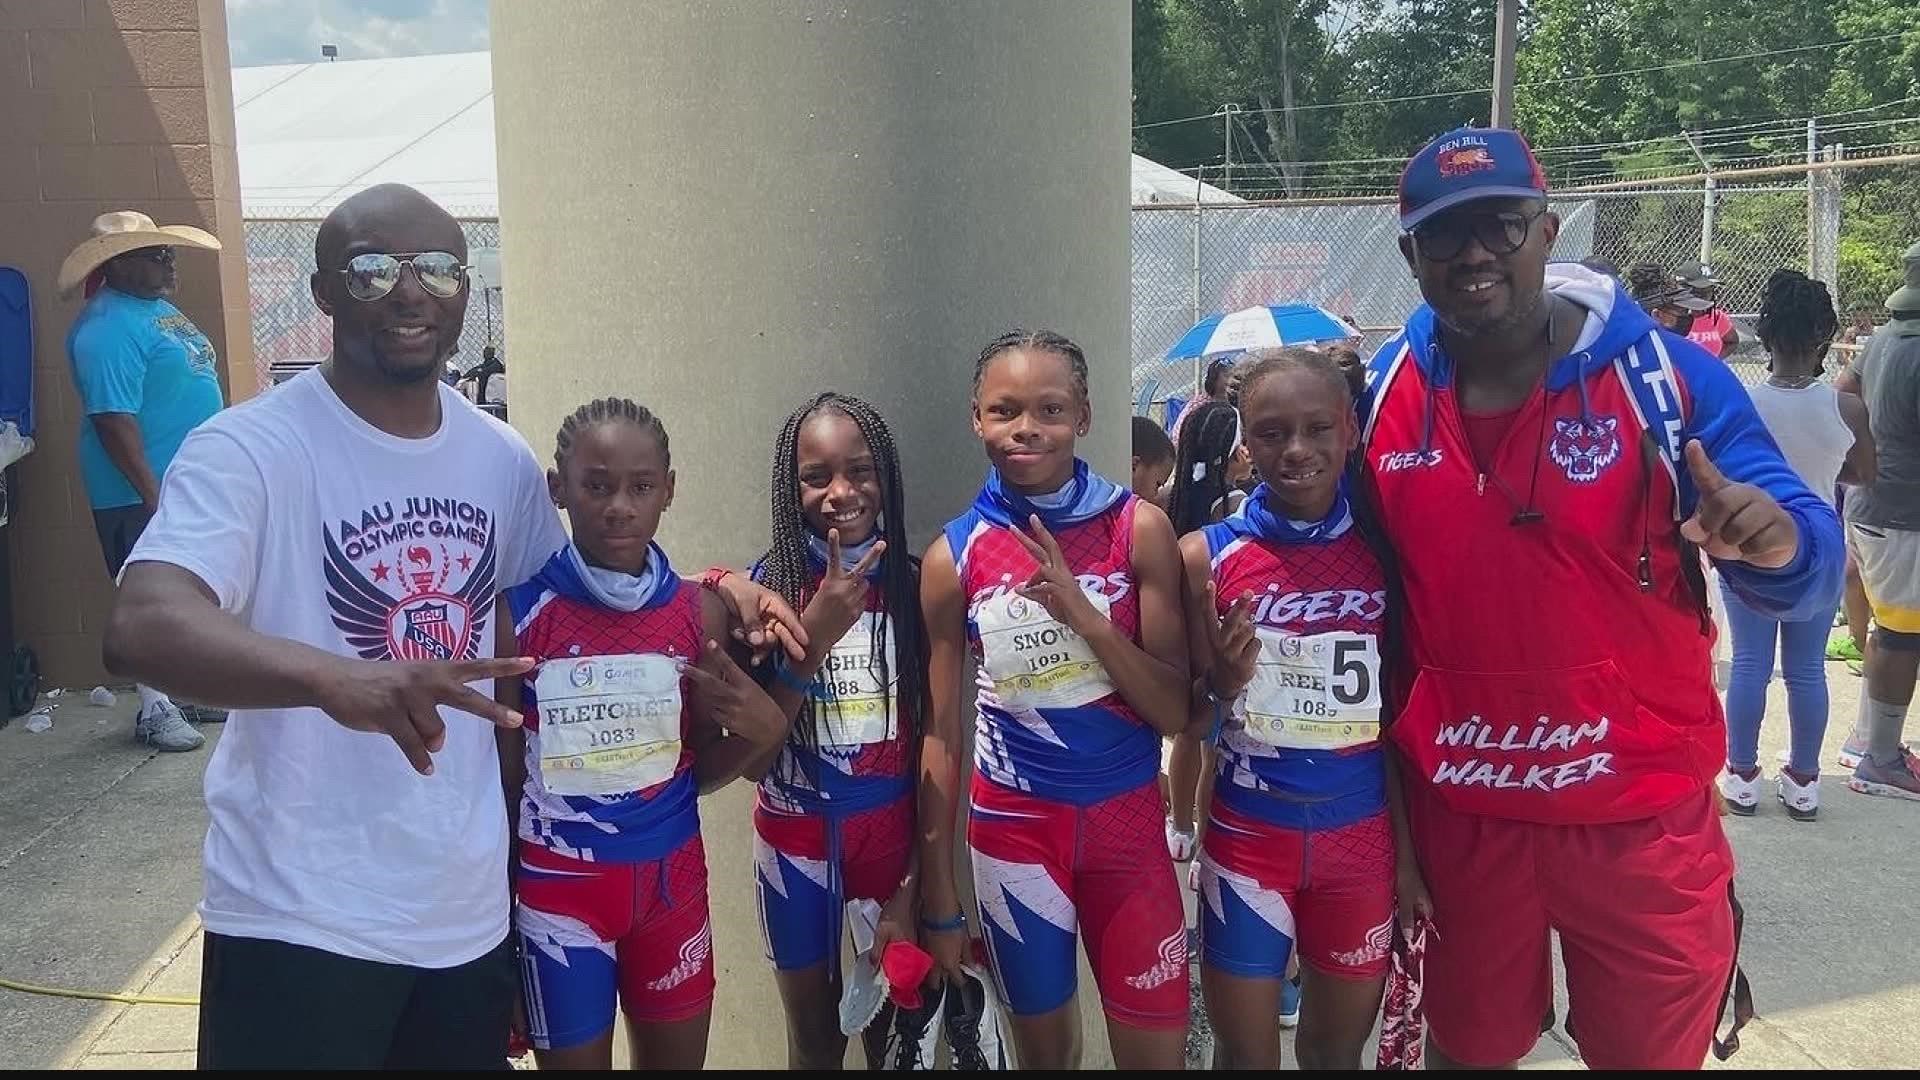 The Southwest Atlanta team says it's about more than just the medals.